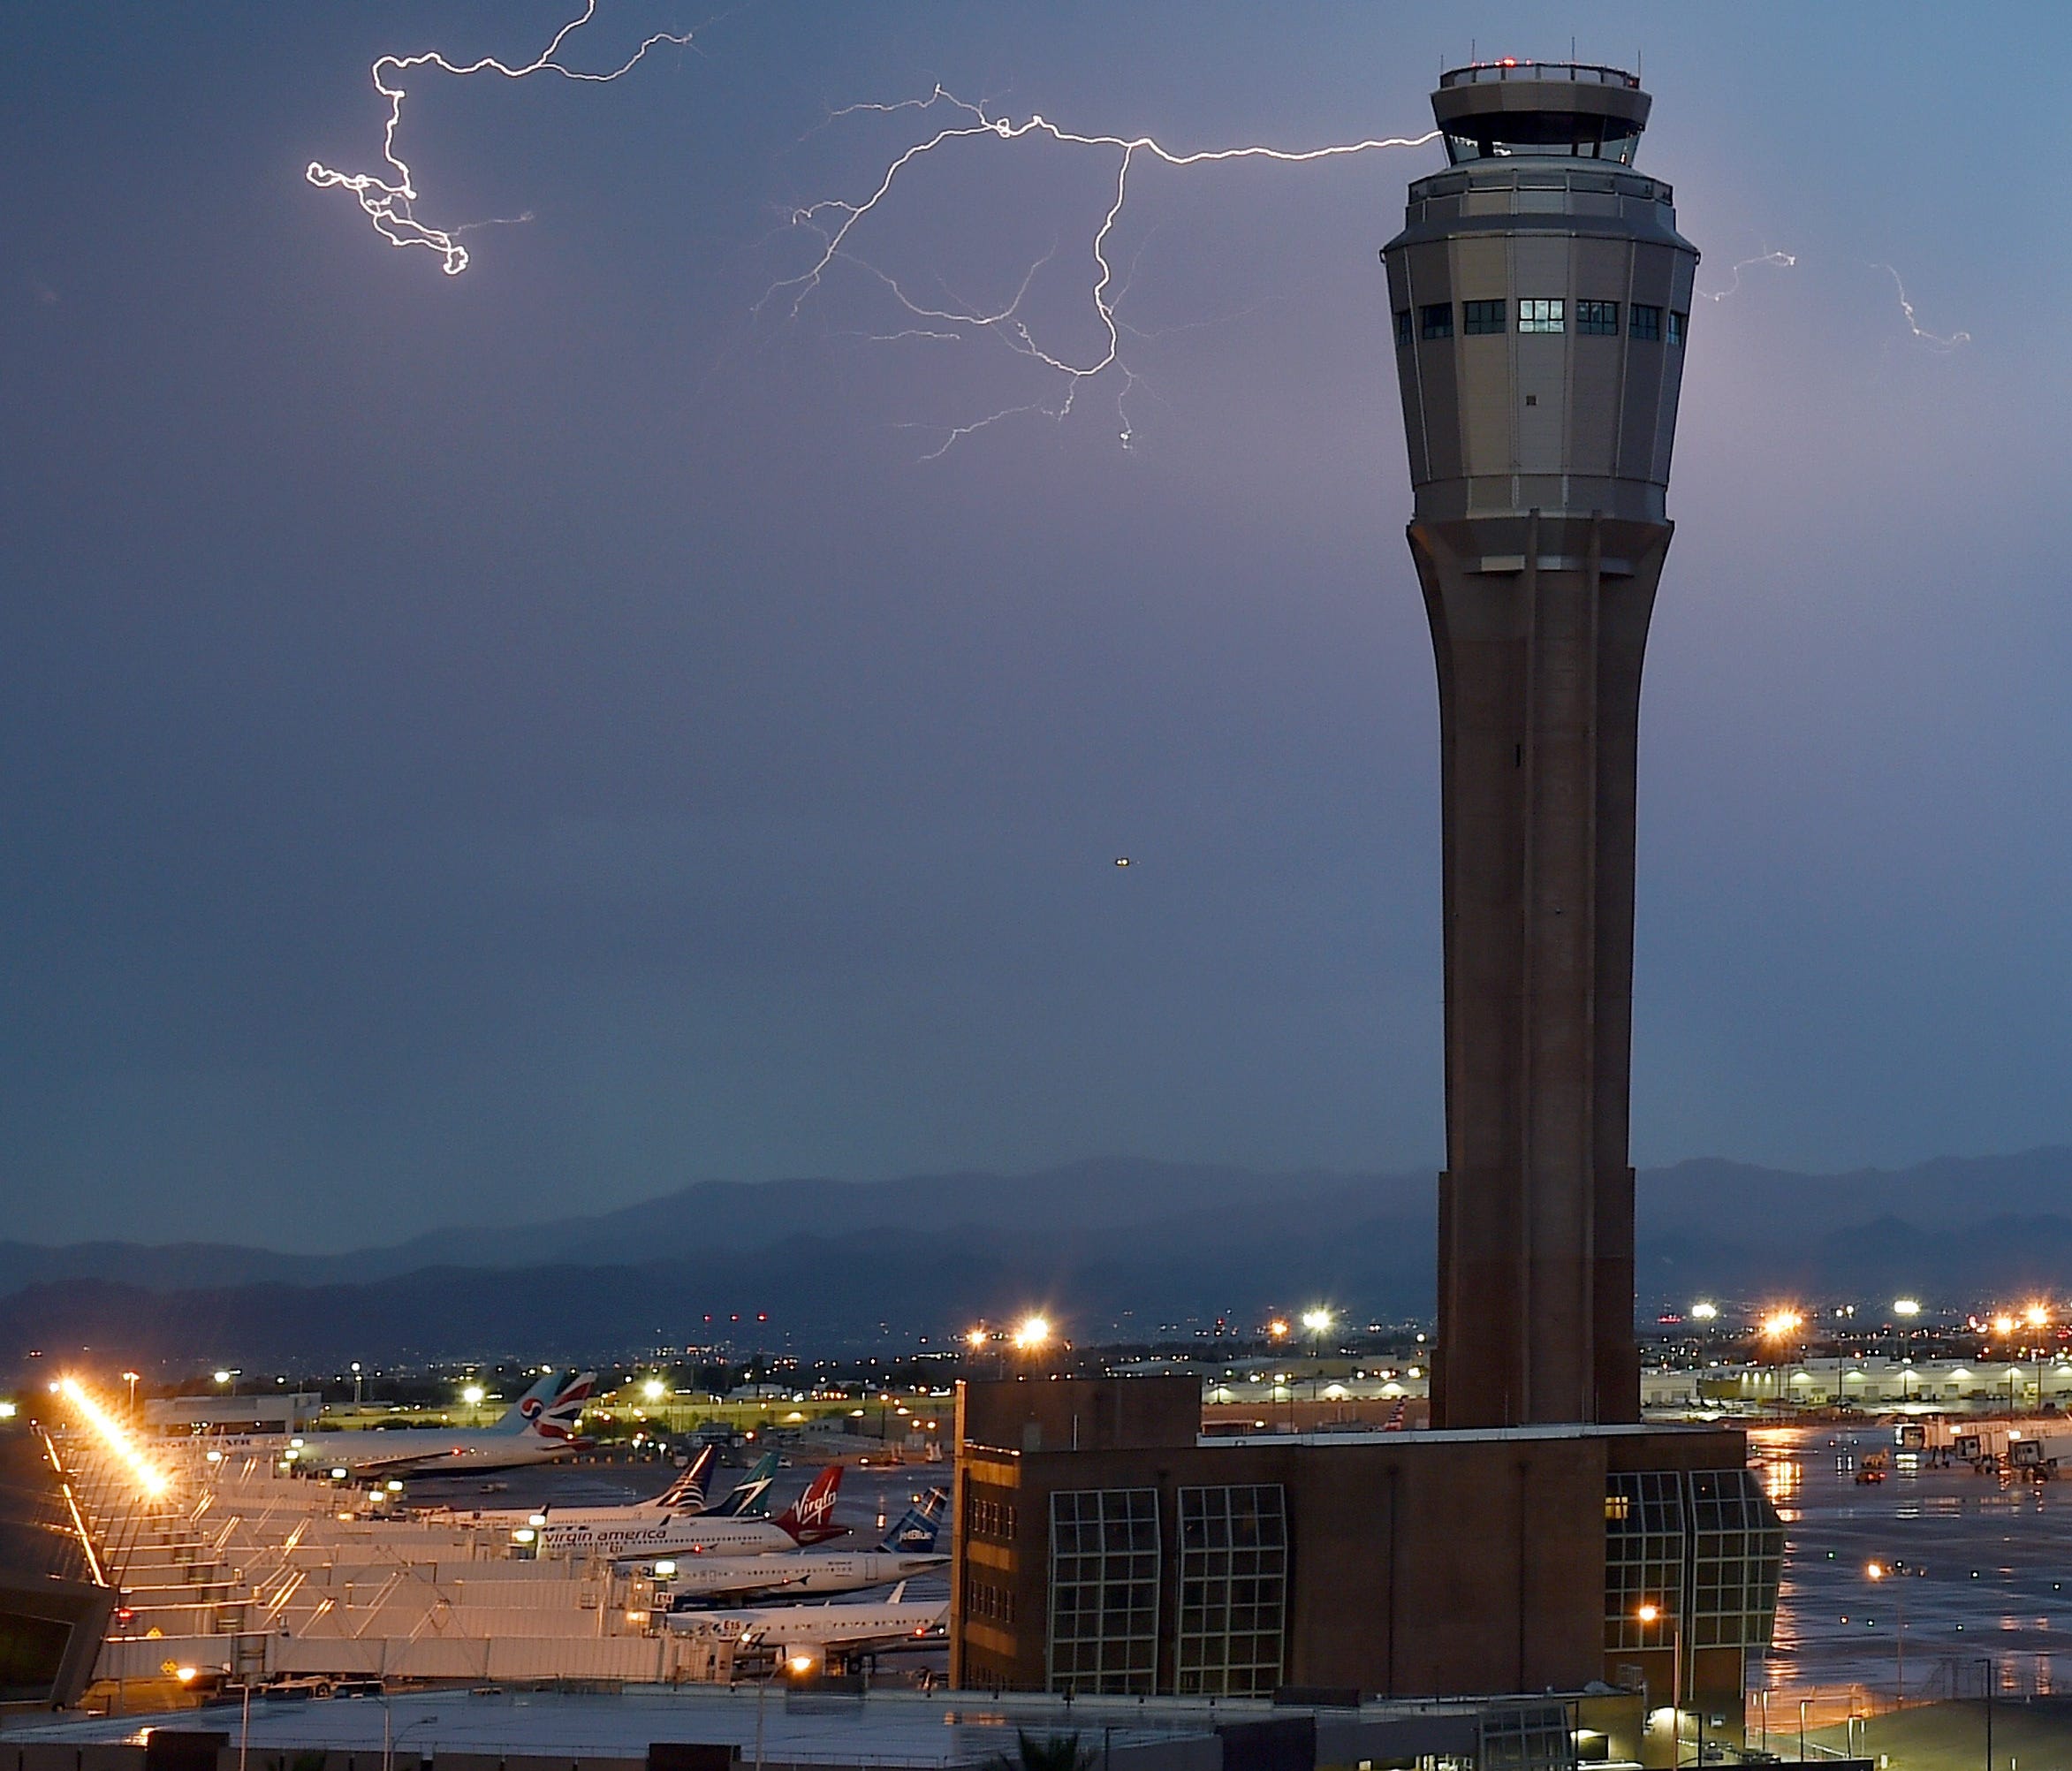 Lightning flashes behind a control tower at Las Vegas McCarran International Airport during a thunderstorm on July 6, 2015.